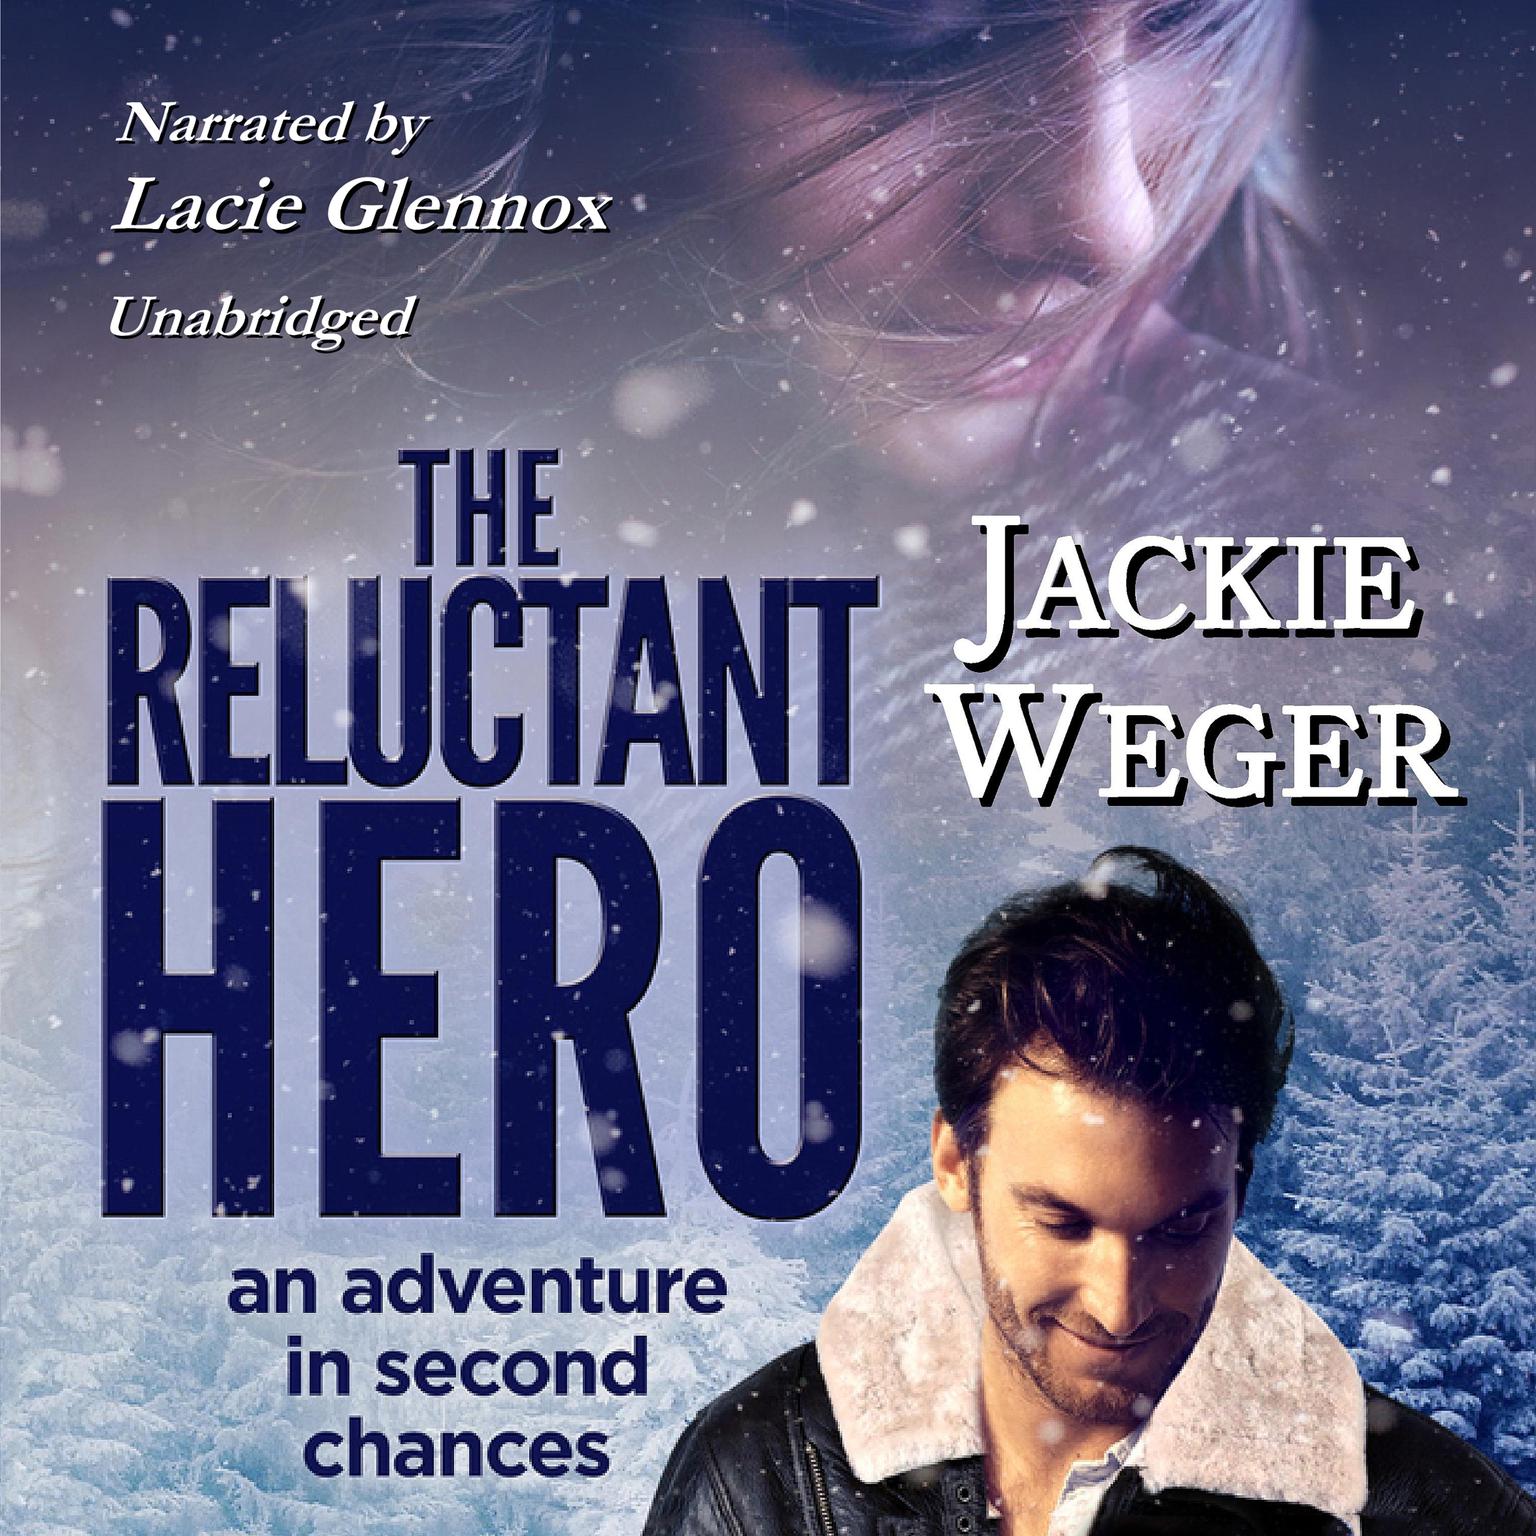 The Reluctant Hero Audiobook, by Jackie Weger